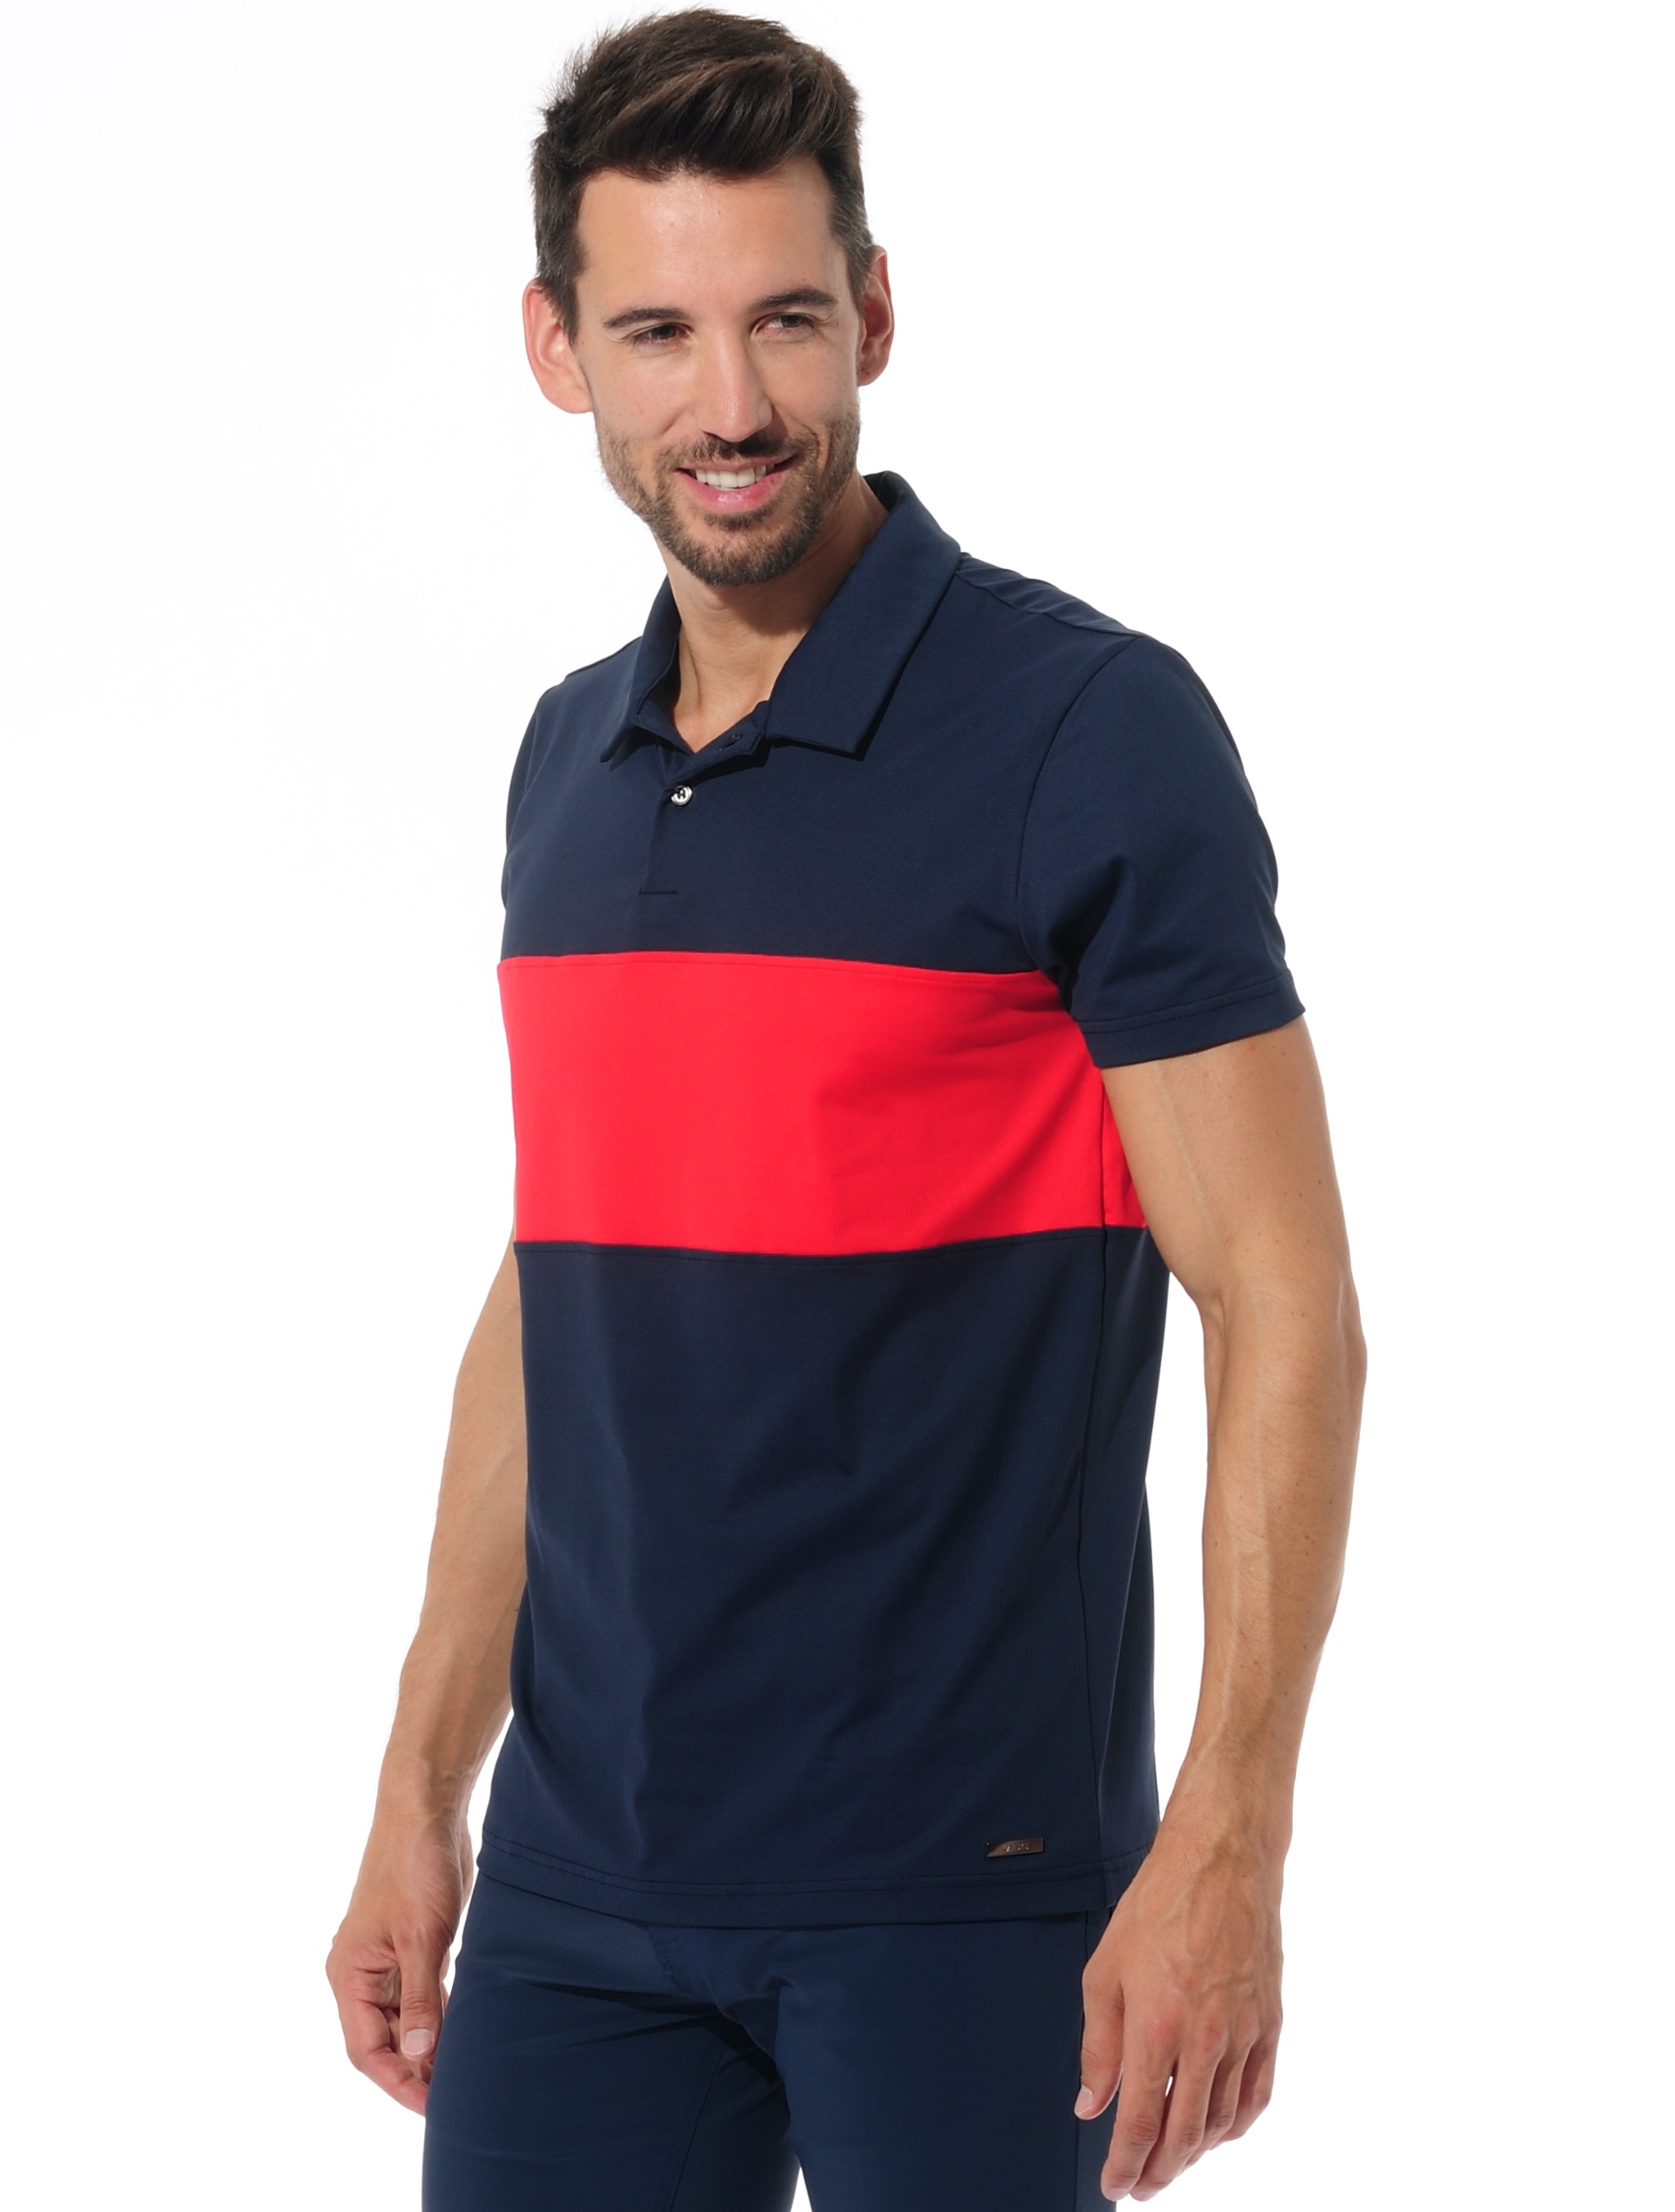 golf polo shirt navy/red 